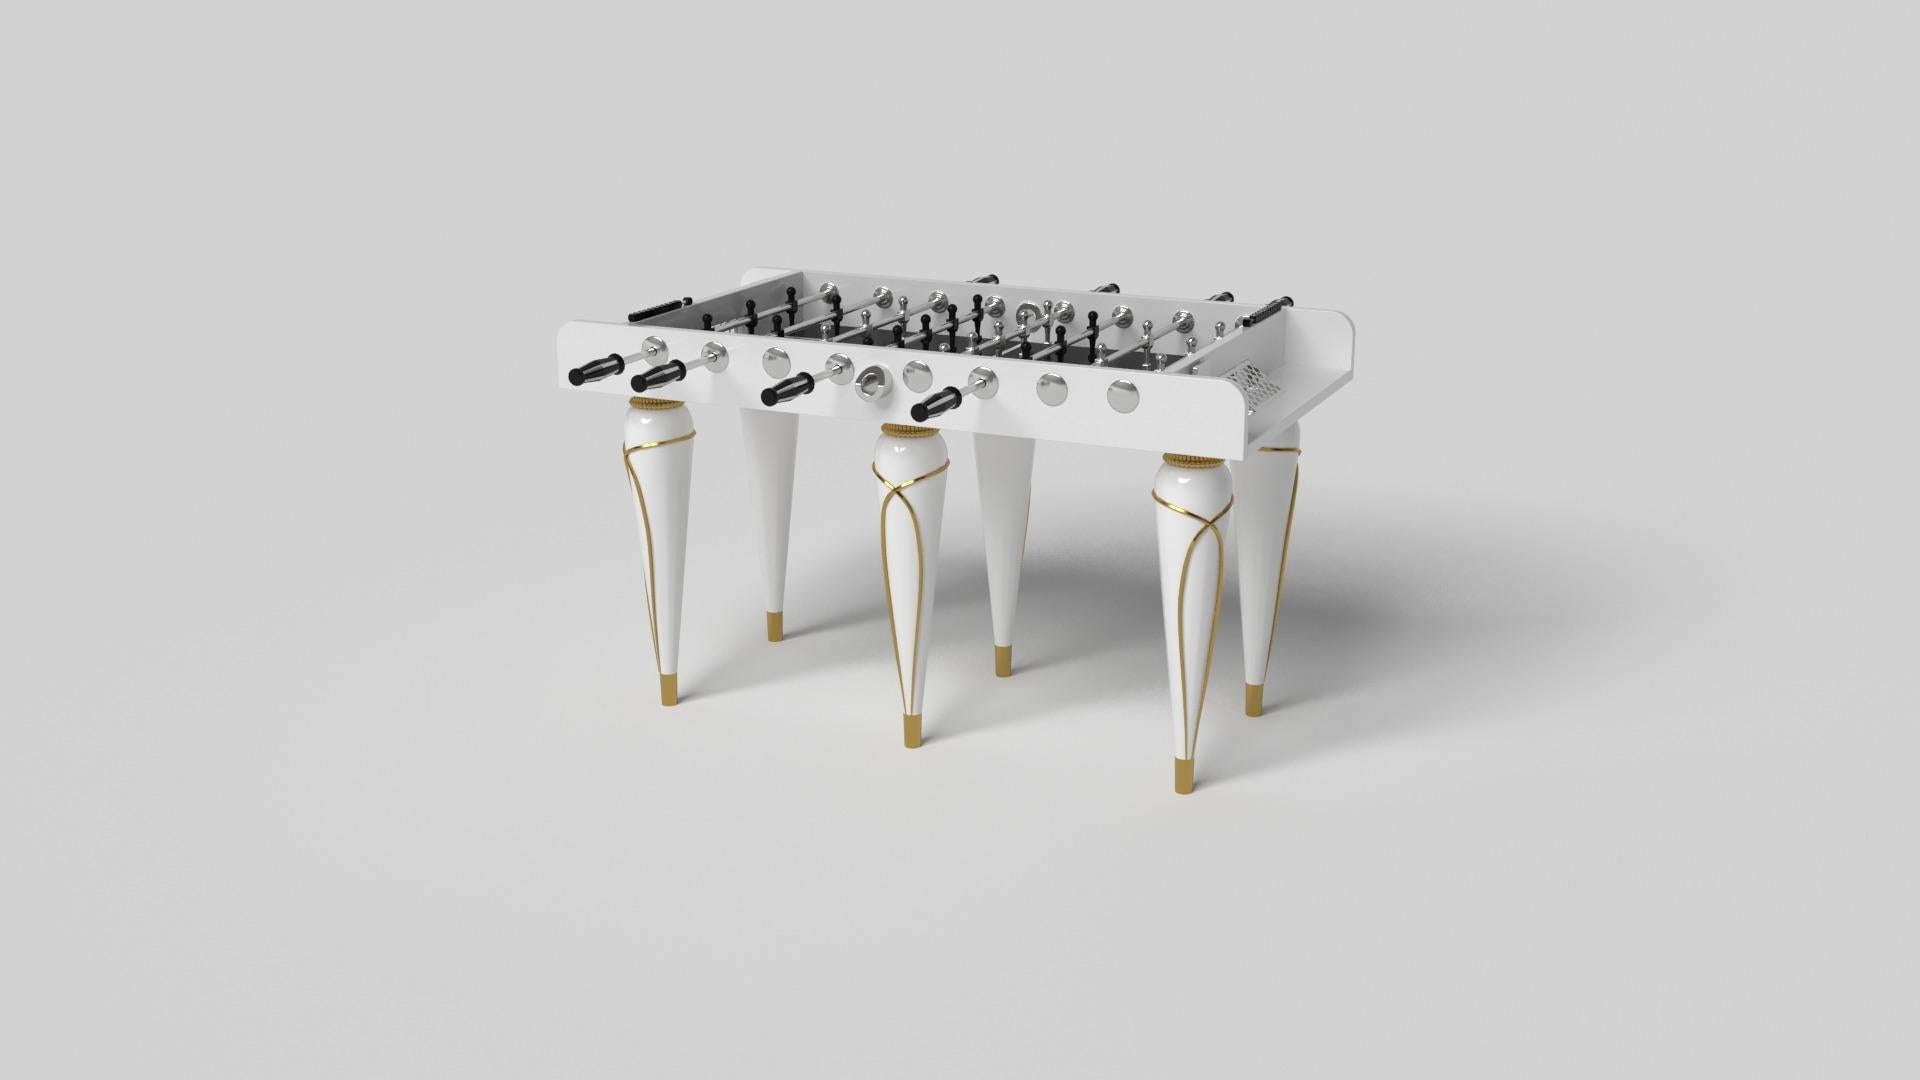 Champagne gold accents add undeniable elegance to this luxury foosball table. Offering superior playability and uncompromised style, this design features hand carved details, decorative metal elements, and metal sabots at the bottom of each leg. The